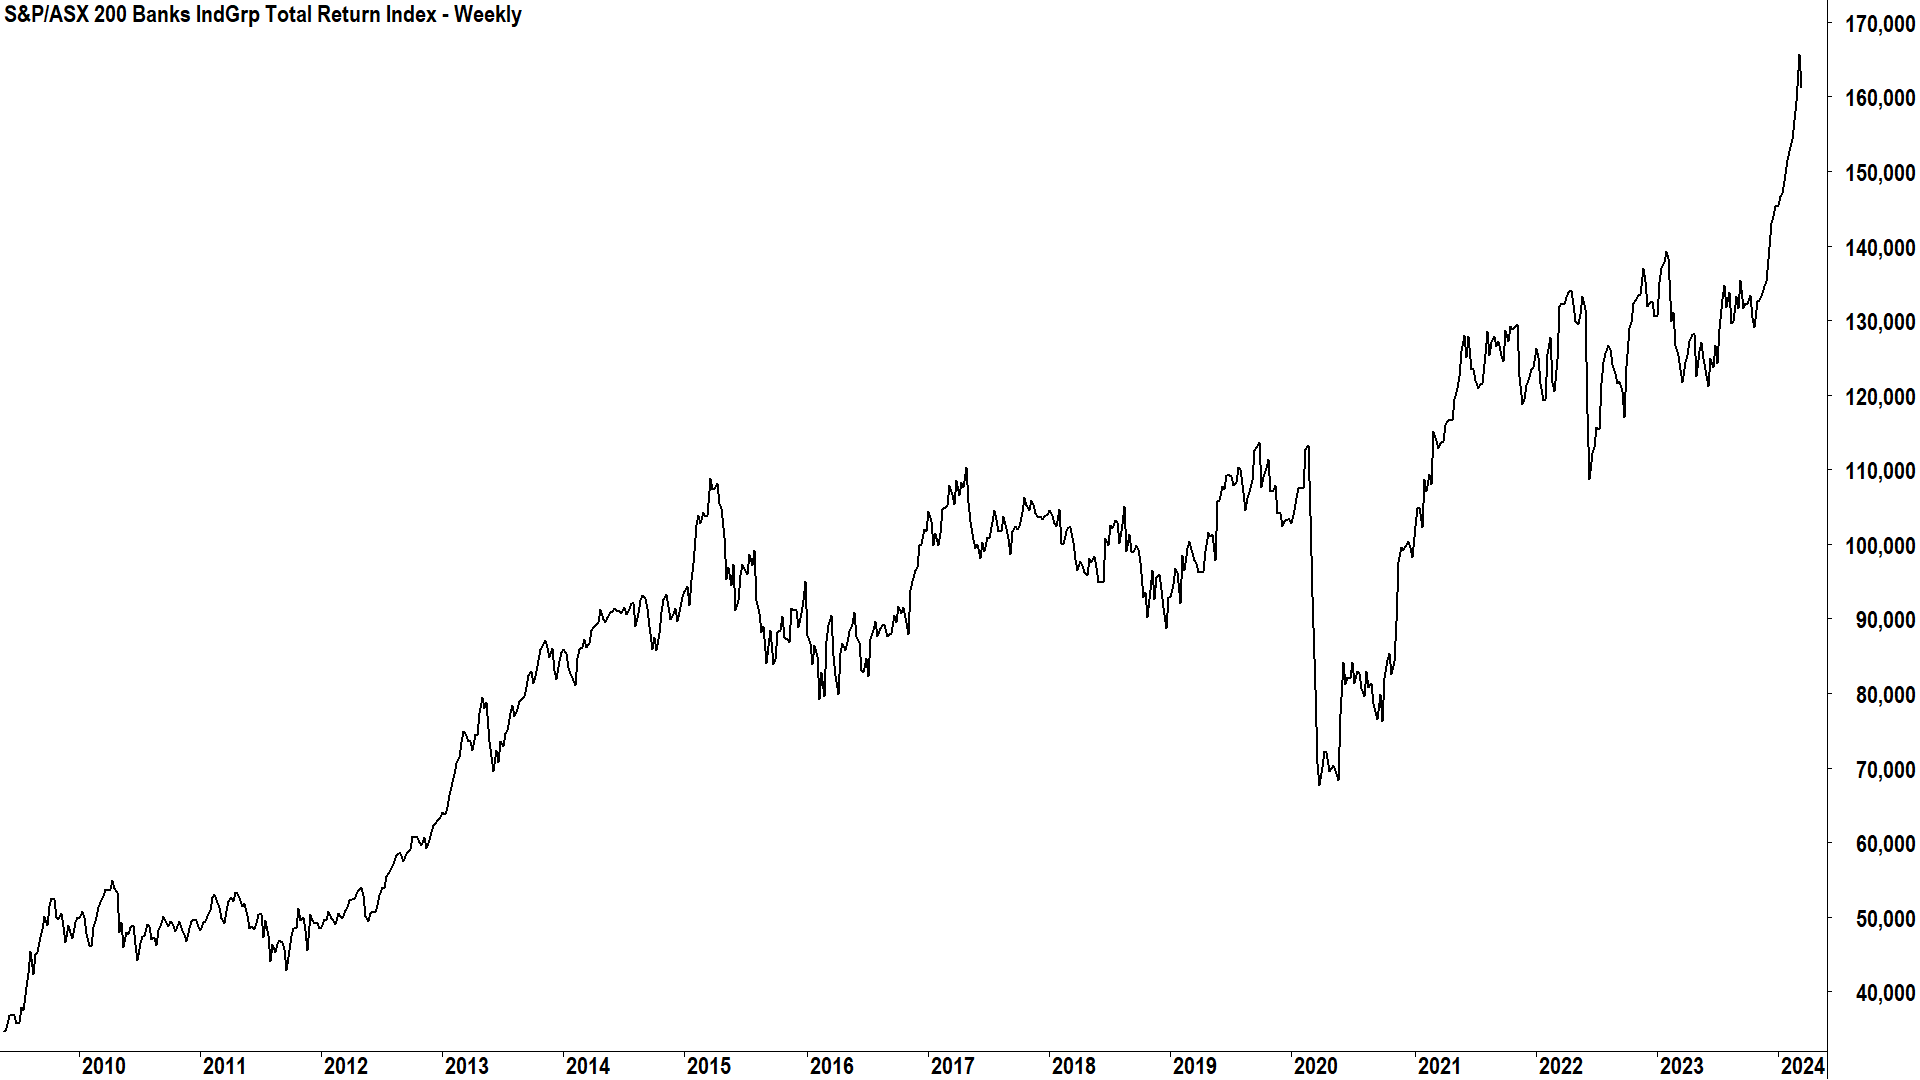 S&P ASX 200 Banks IndGrp Total Return Index 15-years